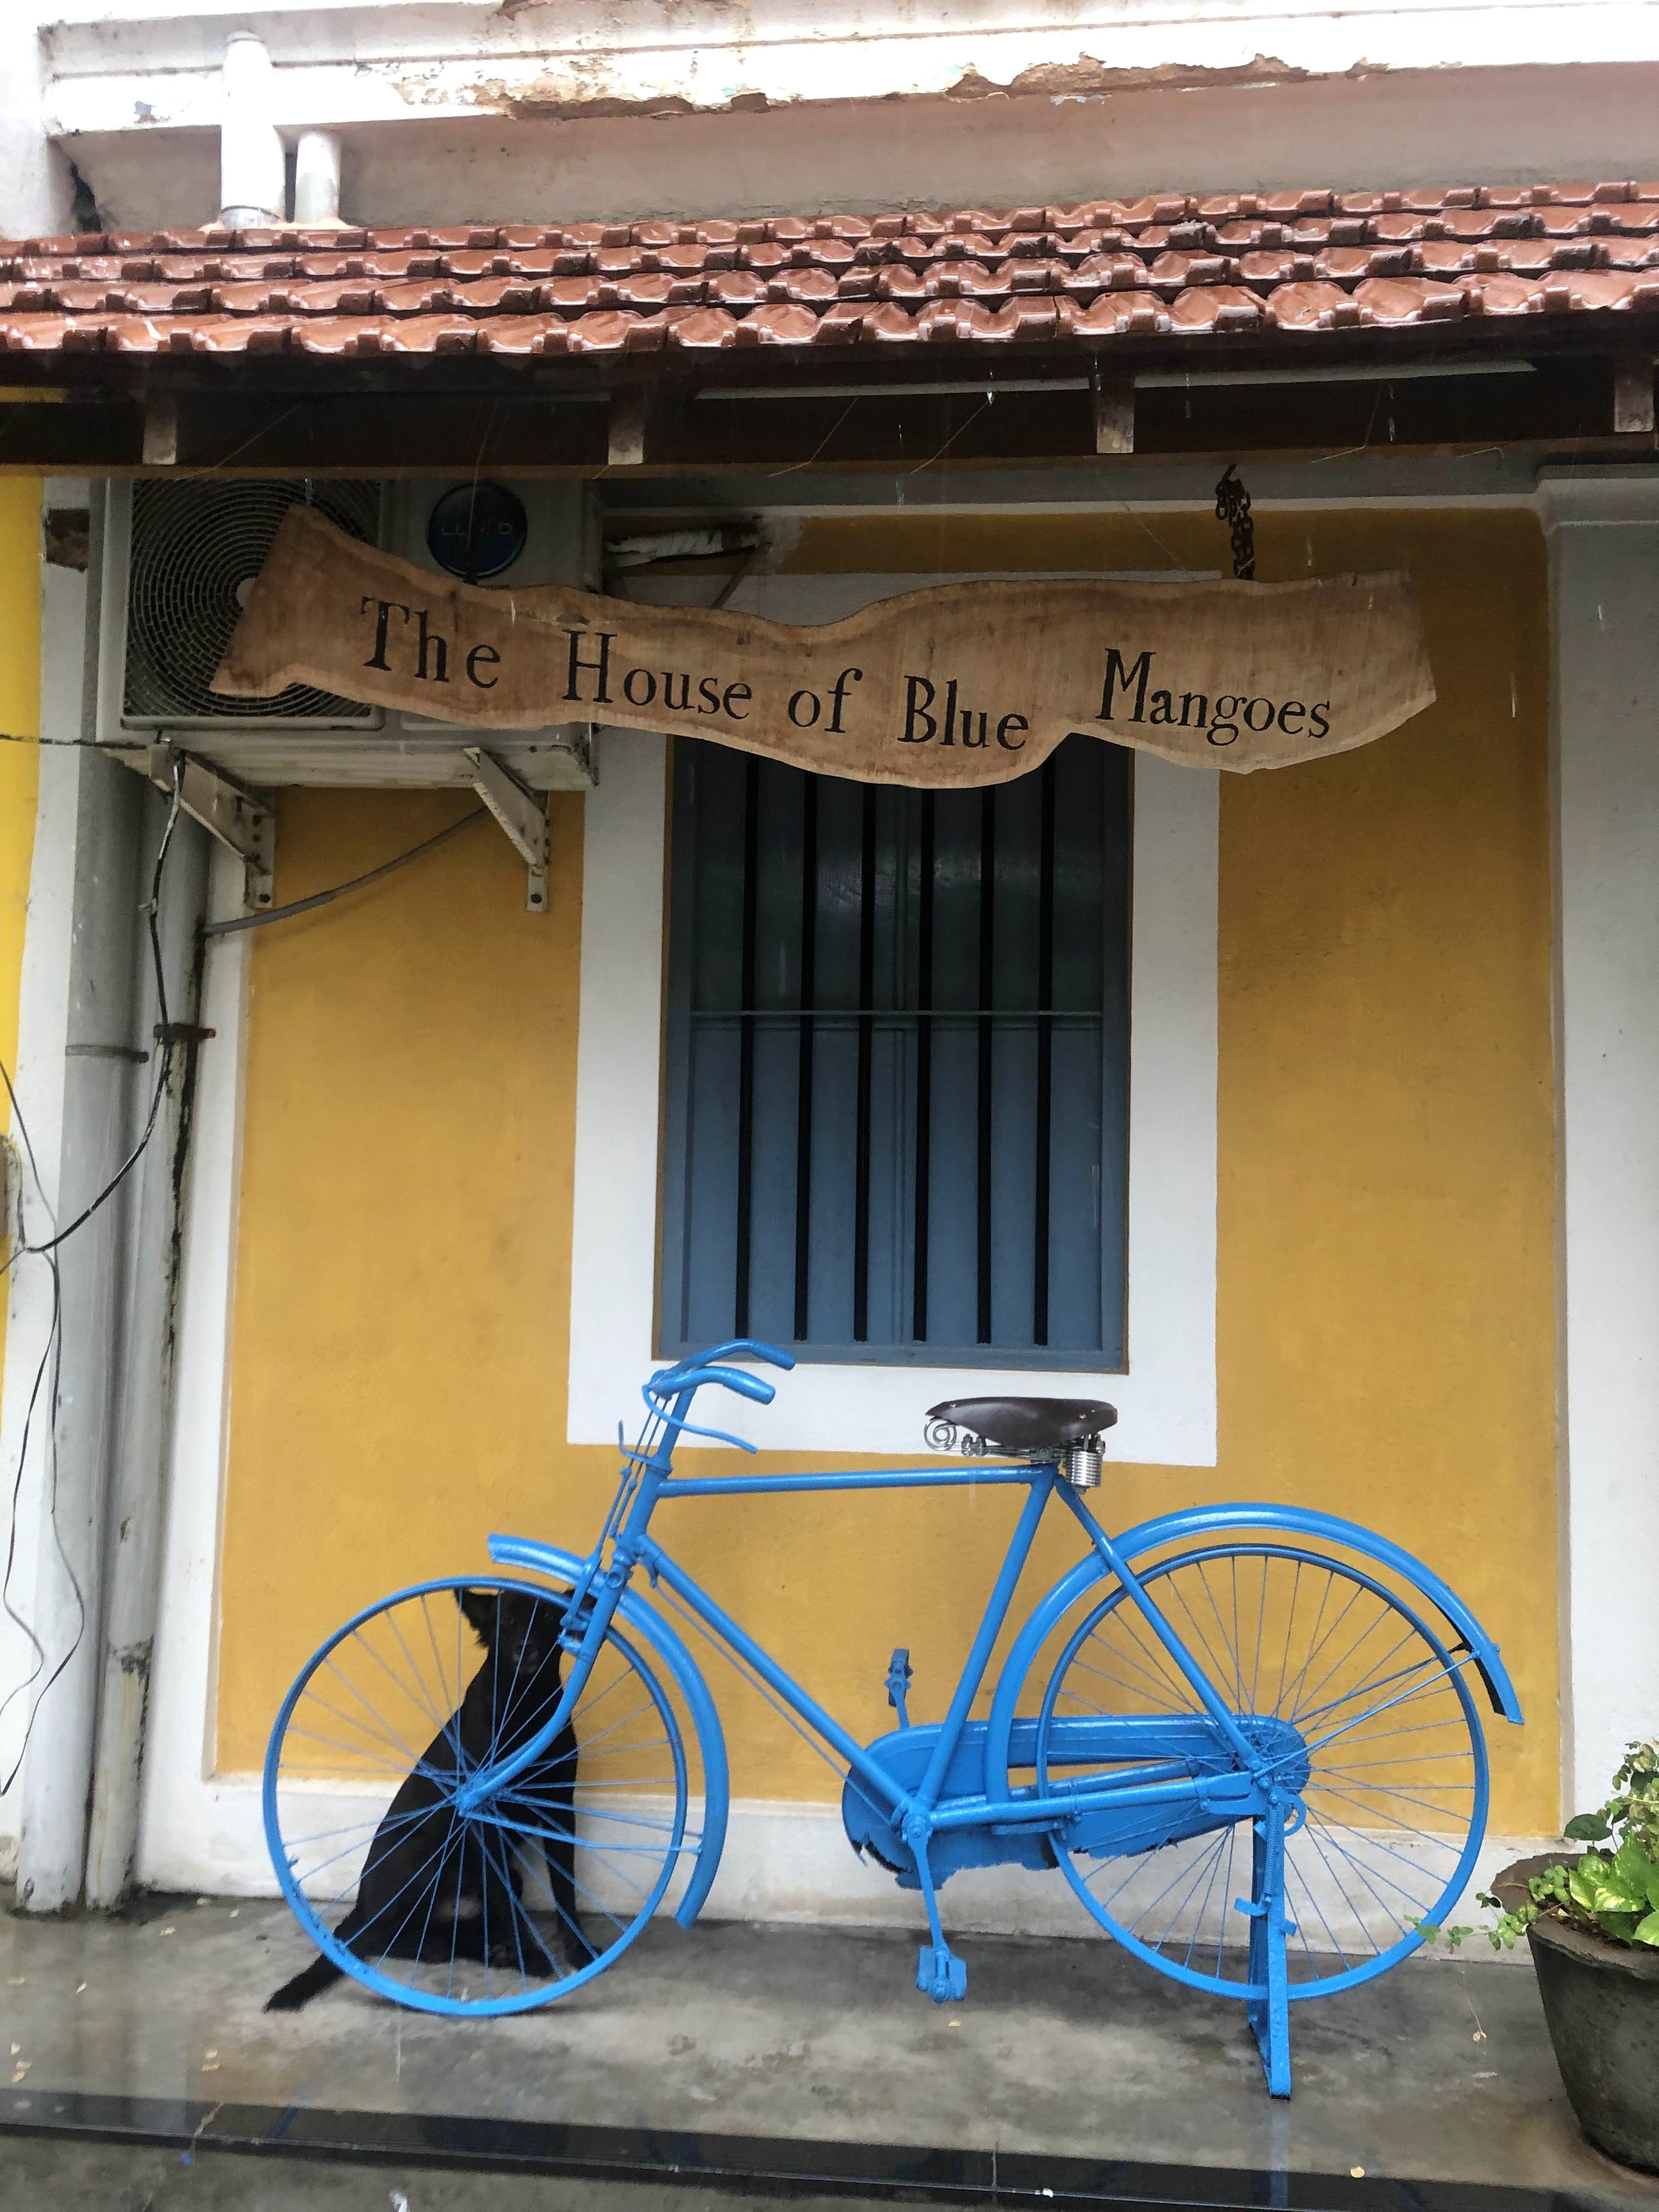 Bicycle,Blue,Bicycle wheel,Yellow,Vehicle,Wall,Bicycle part,Snapshot,Door,Architecture